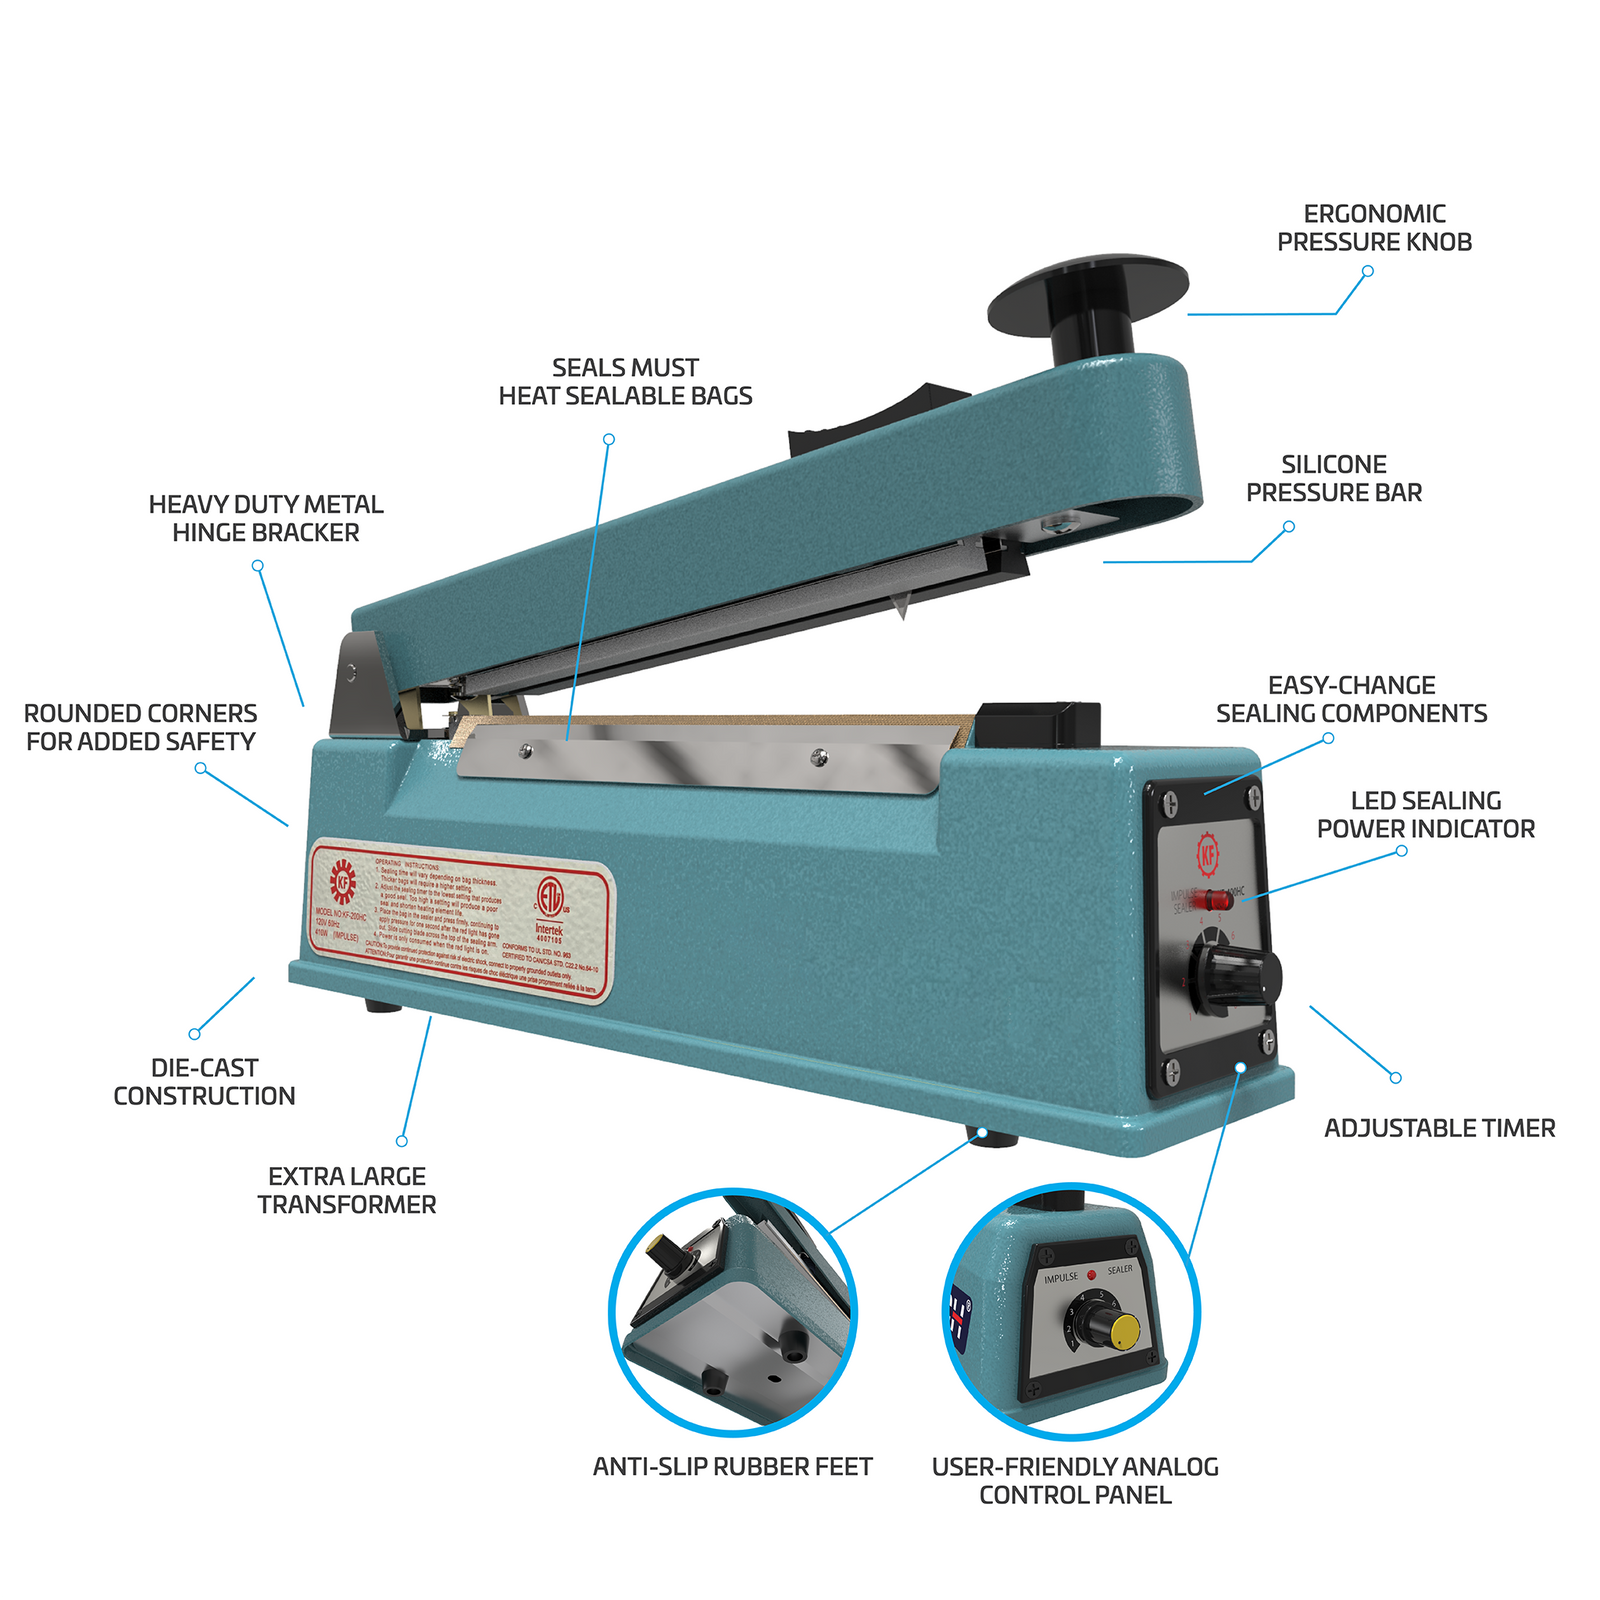 Features of the manual heat sealing machine with cutter: adjustable timer, analog control panel, extra large transformer, die cast construction, rounded corners, heavy duty metal seal for sealable bags, ergonomic pressure knob, silicone pressure bar, easy change sealing components, led sealing power indicator